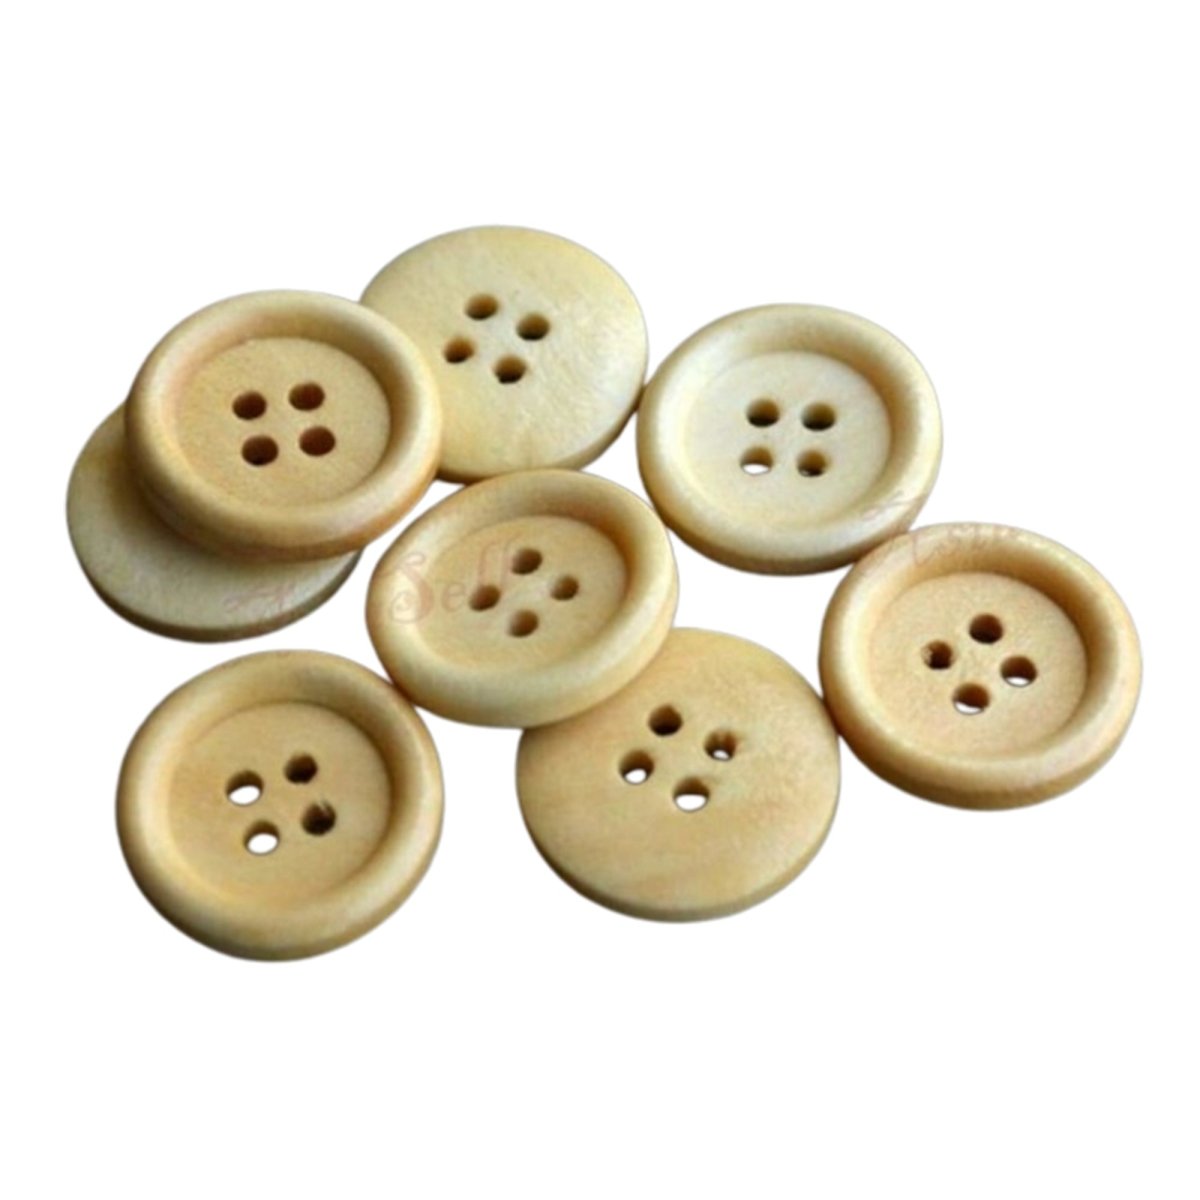 100pcs 4 Holes 10mm Round Wooden Buttons Button Handmade Clothes 4 Hole - Asia Sell